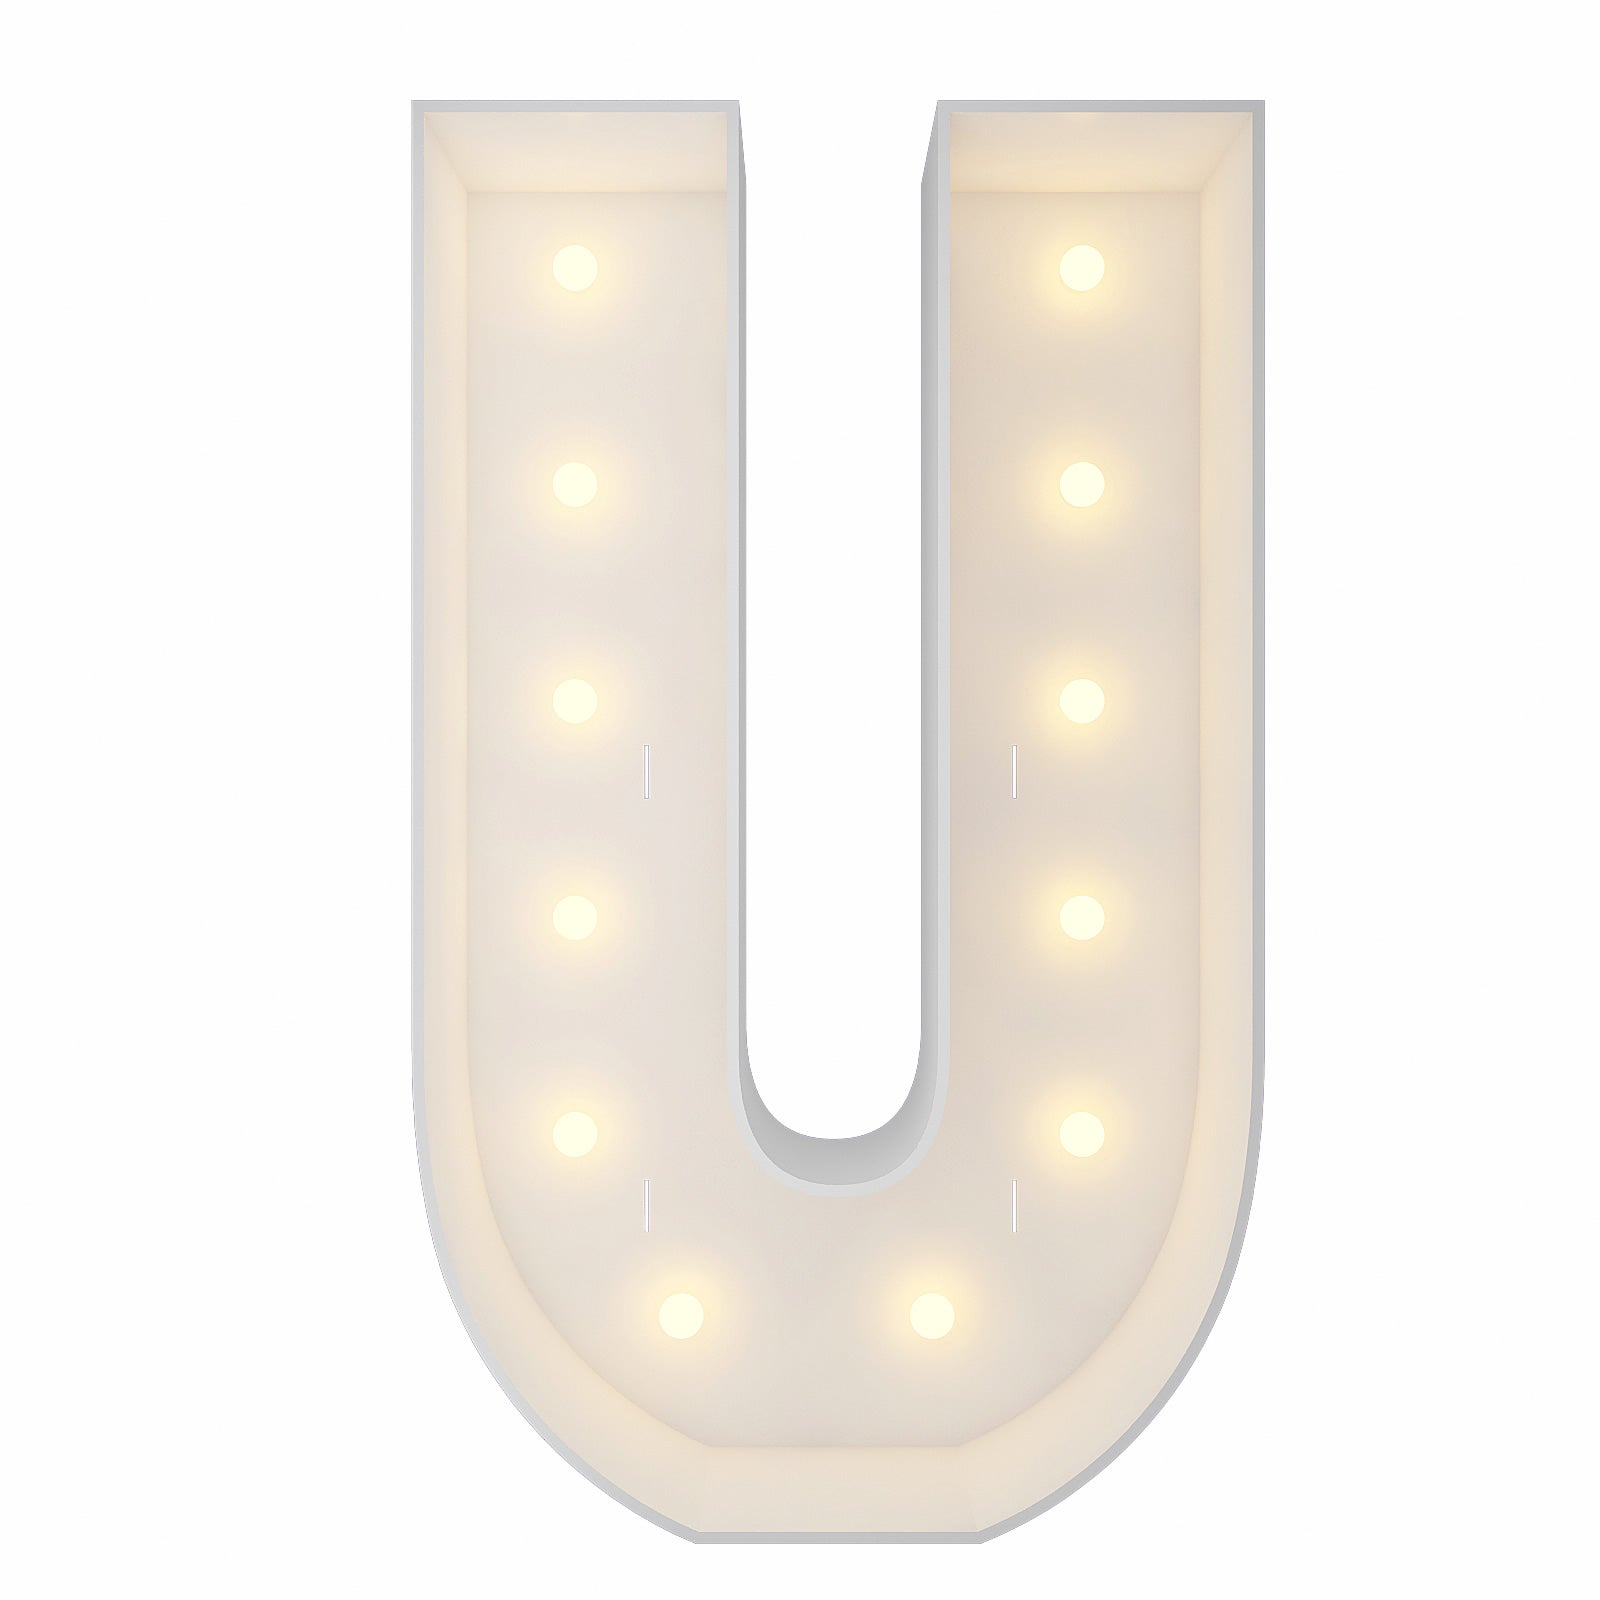 4FT Marquee Light Up Letters, Cool White Light Up Letters , Large